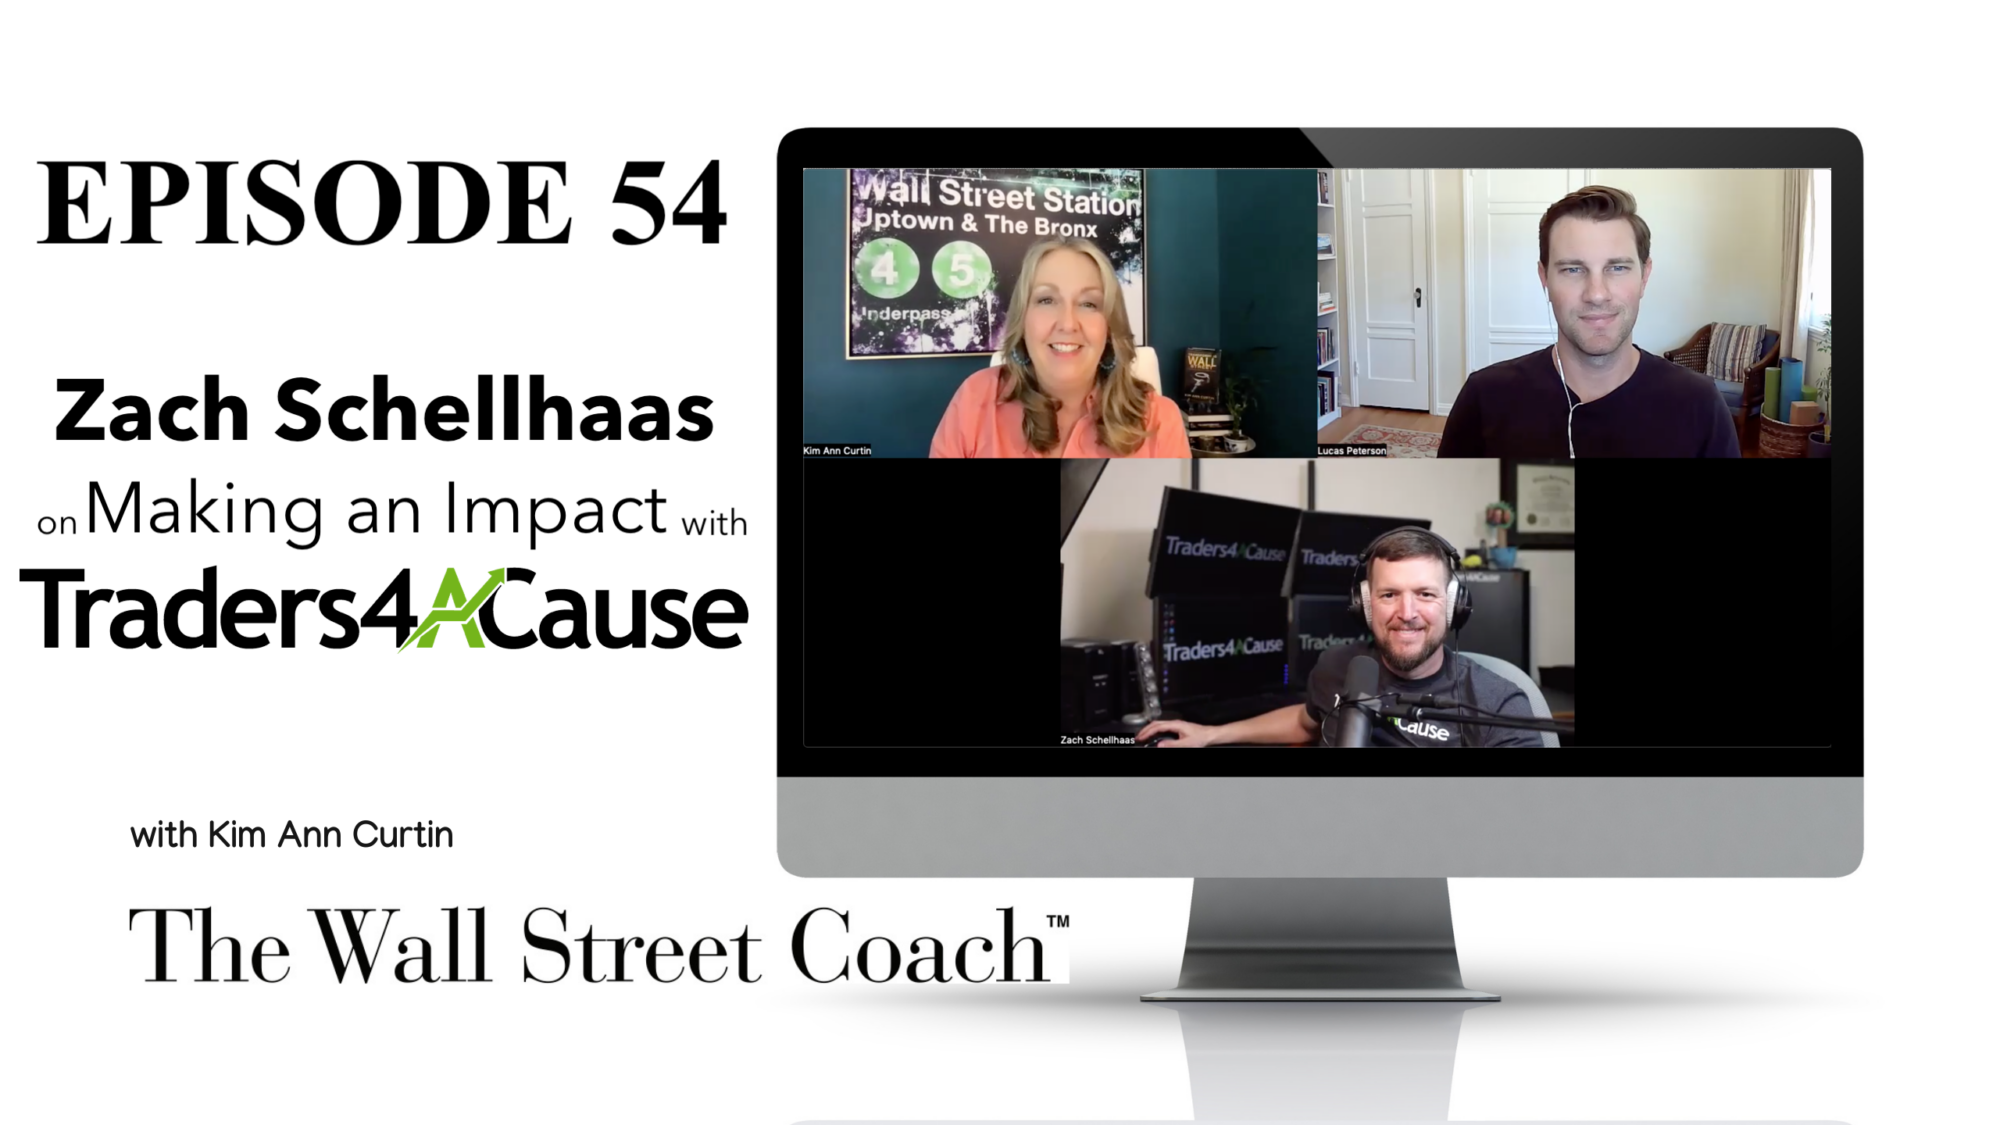 Episode 54: Zach Schellhaas on Making an Impact with Traders4ACause